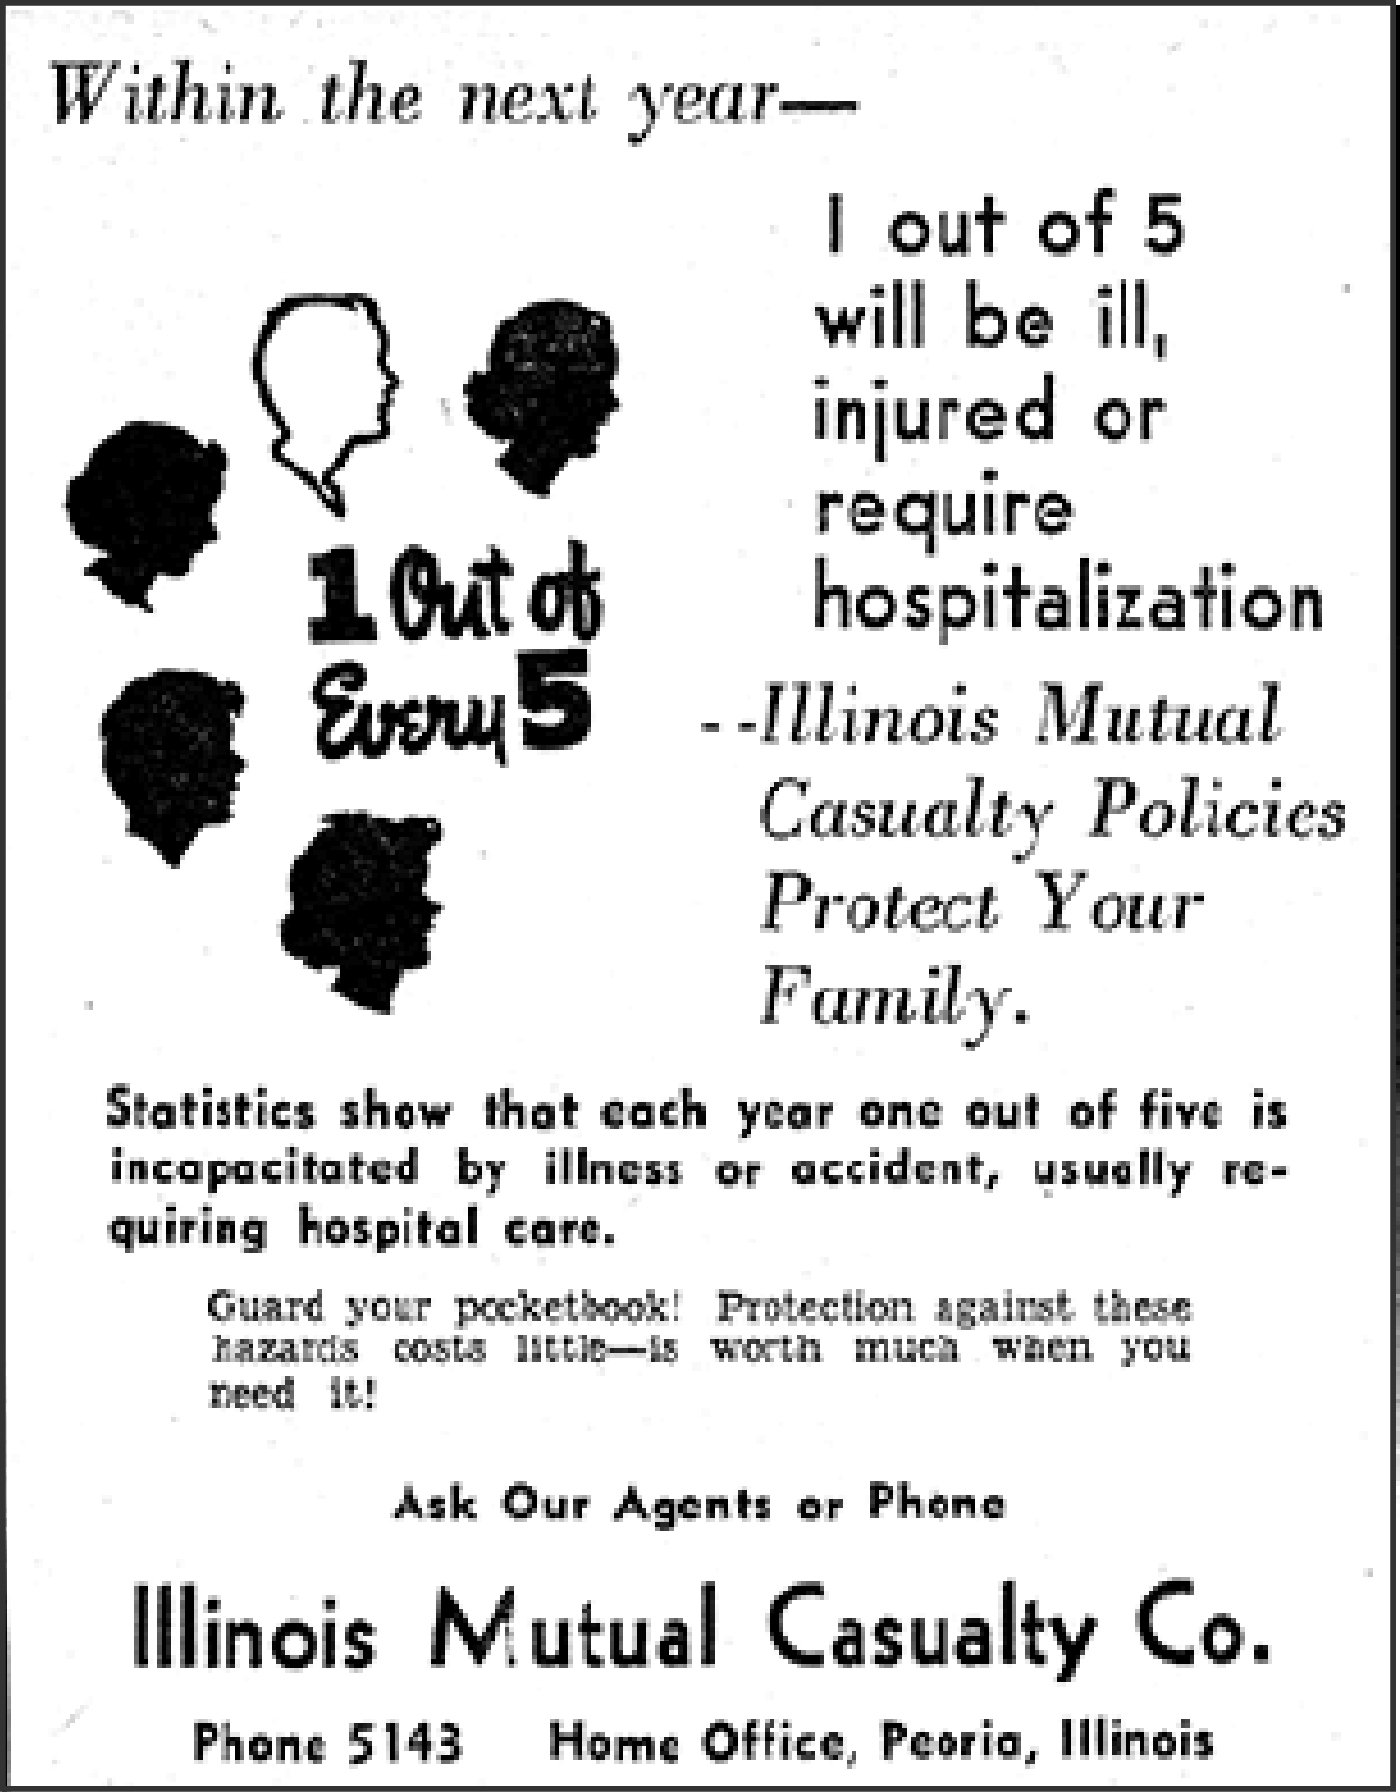 Advertisement for Disability Income Insurance offered by Illinois Mutual Casualty Company.